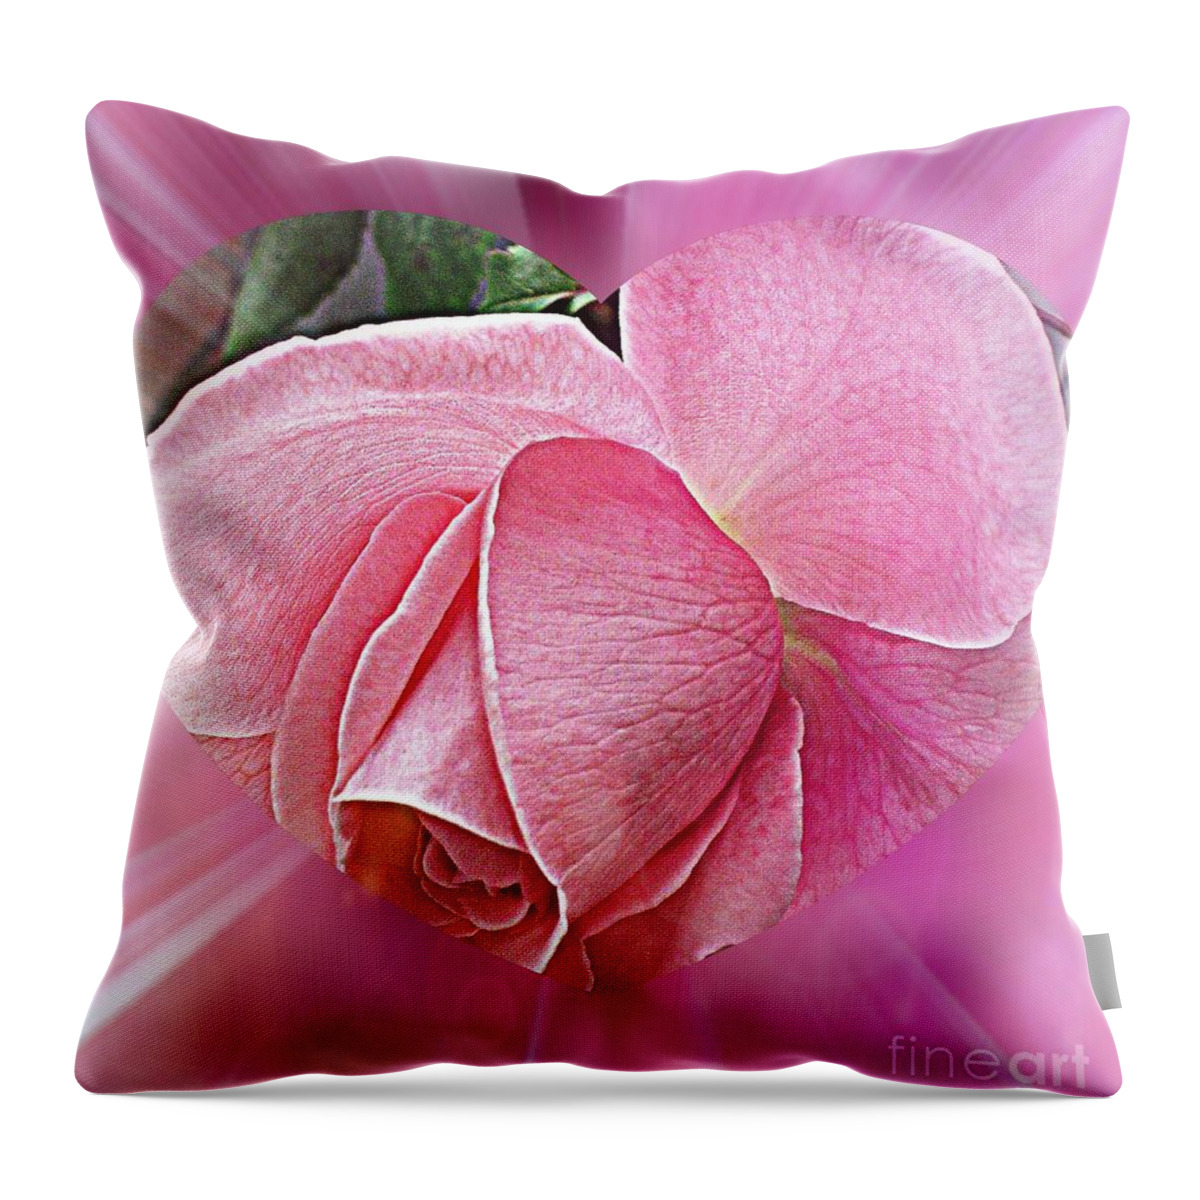 Rose Rose Throw Pillow featuring the photograph Pink Ribbons Of Light by Judy Palkimas